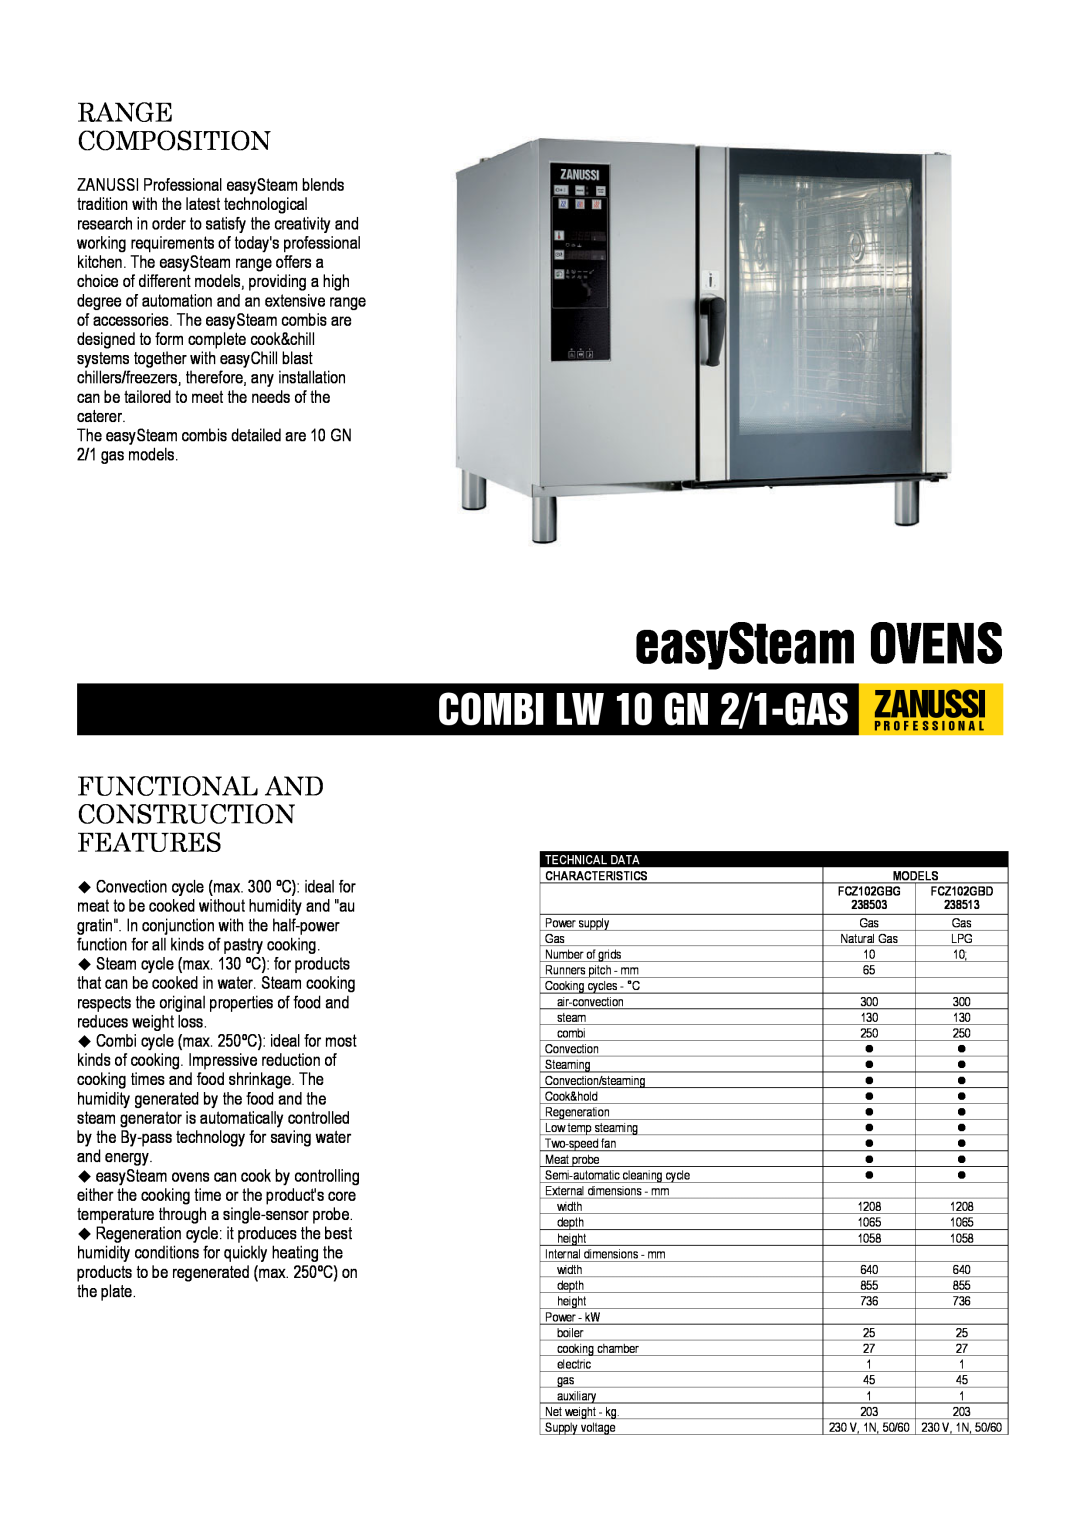 Zanussi 238503, 238513, FCZ102GBG dimensions easySteam OVENS, Range Composition, Functional And Construction Features 